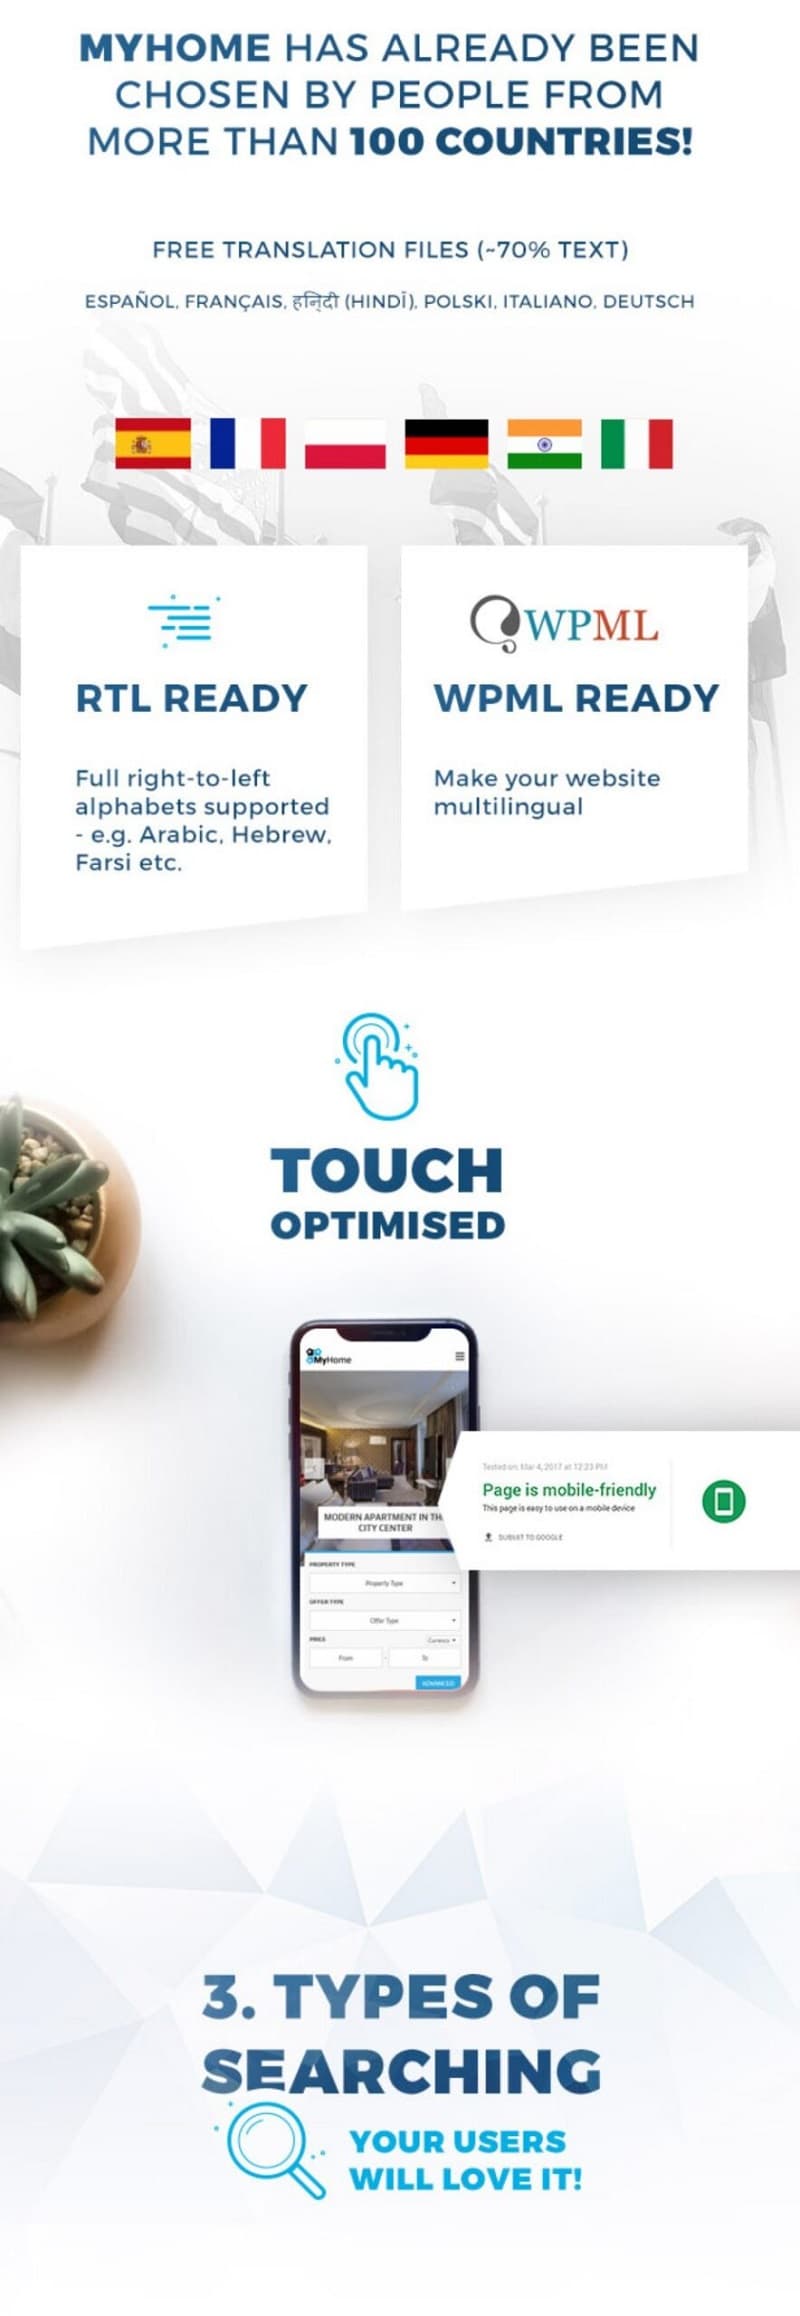 MyHome-touch-optimised